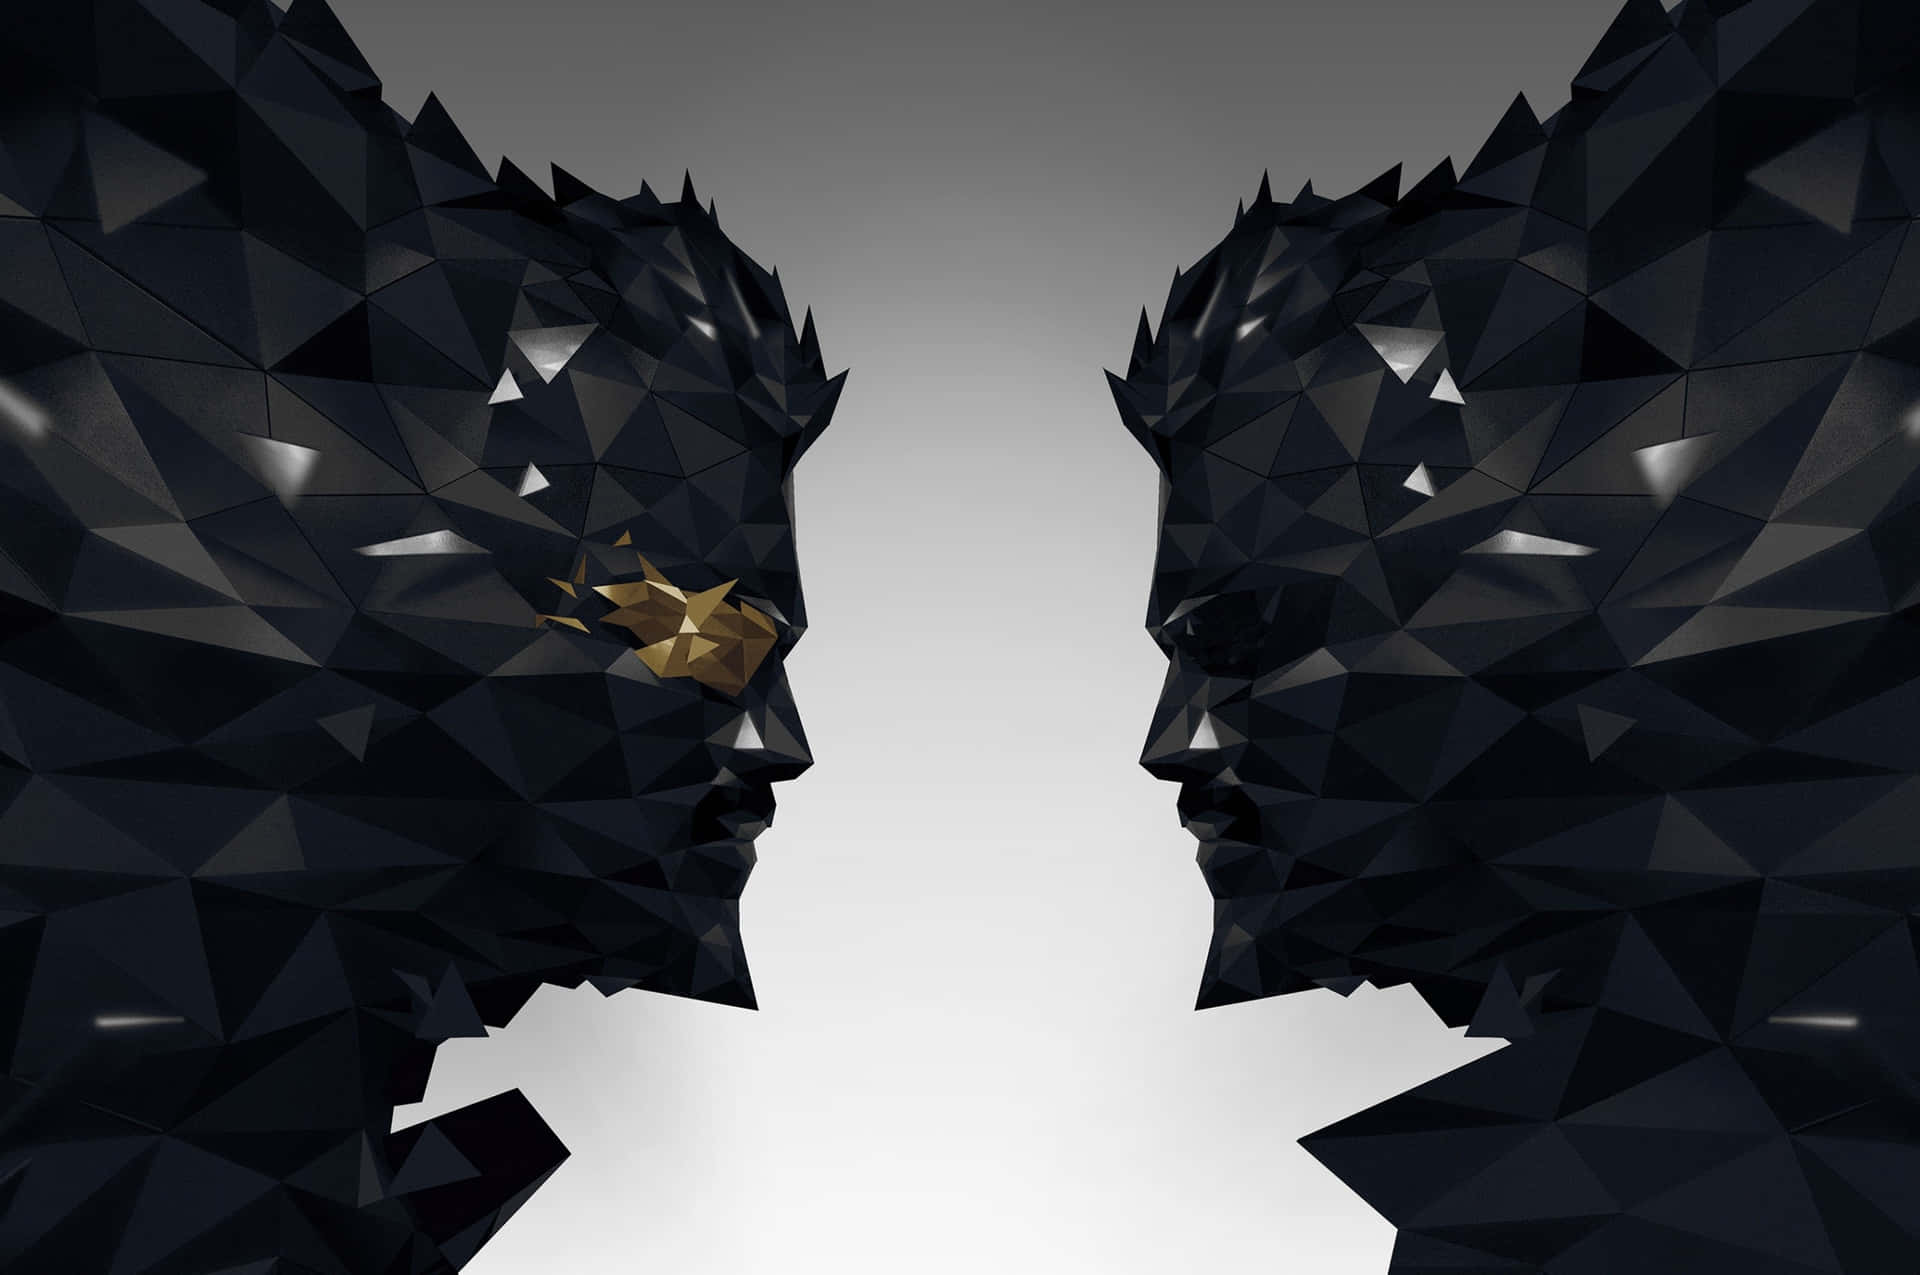 A Black And White Image Of Two Faces With Gold Heads